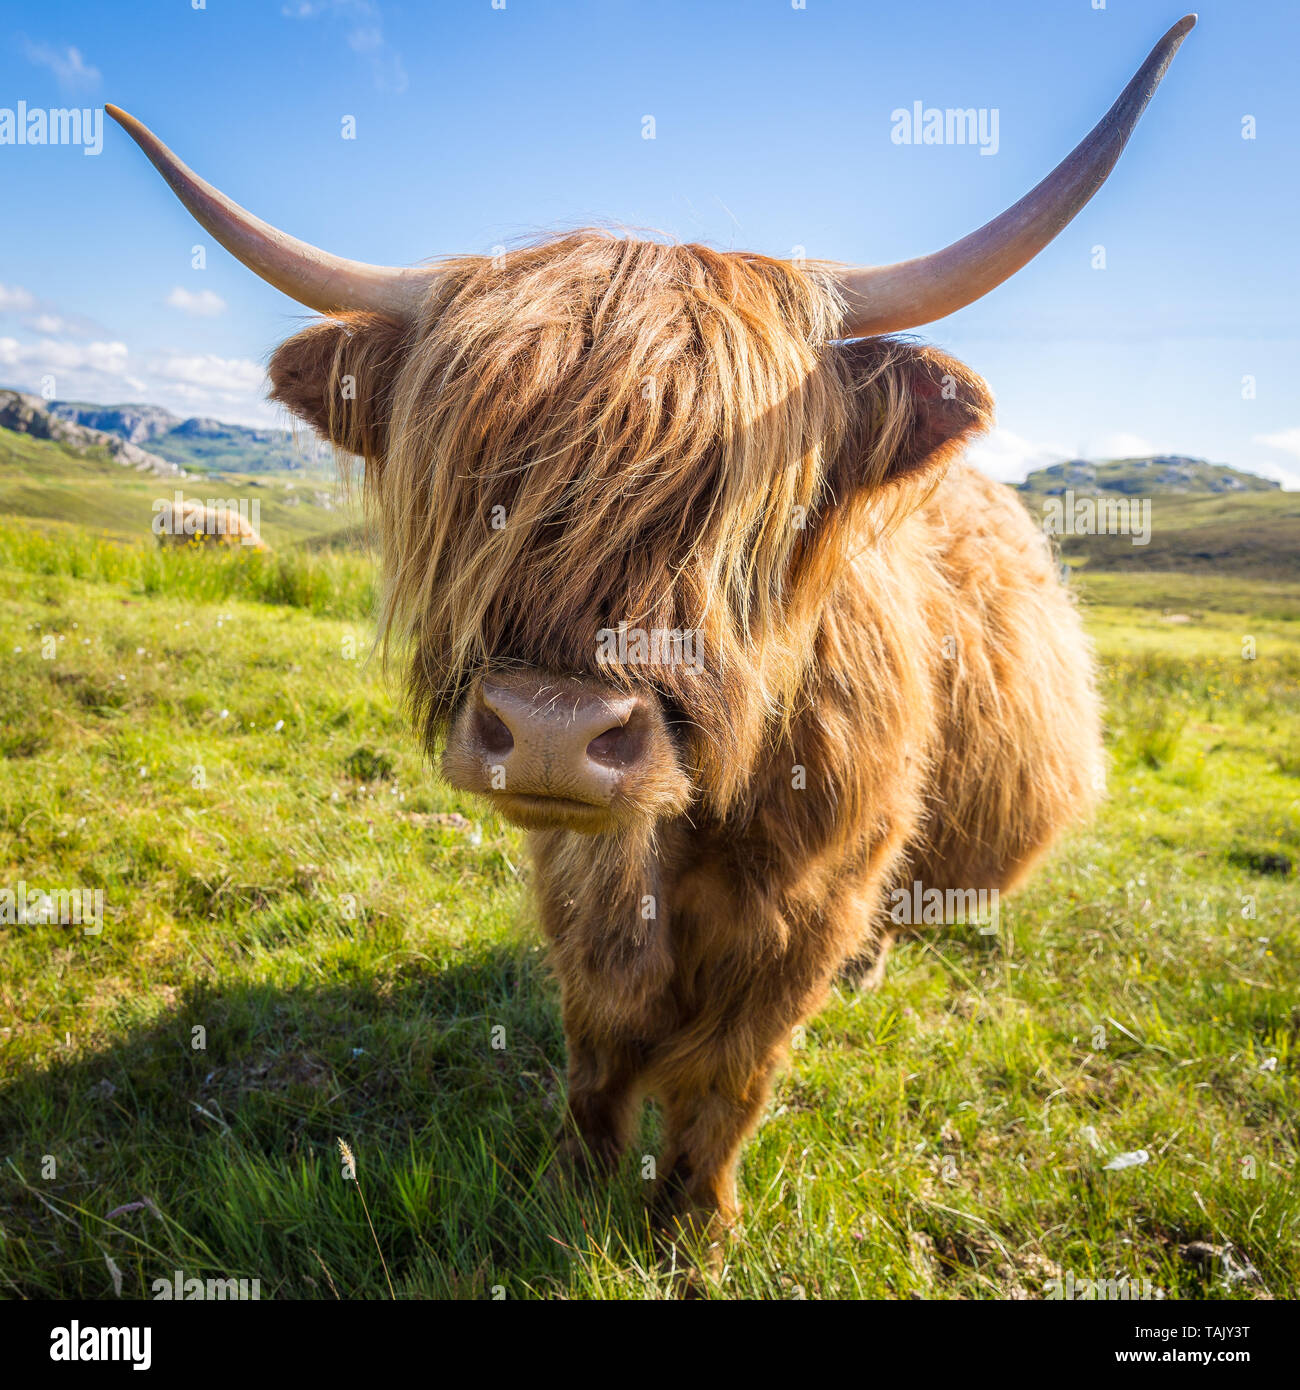 Scottish Highland Bull with long hair covering face Stock Photo